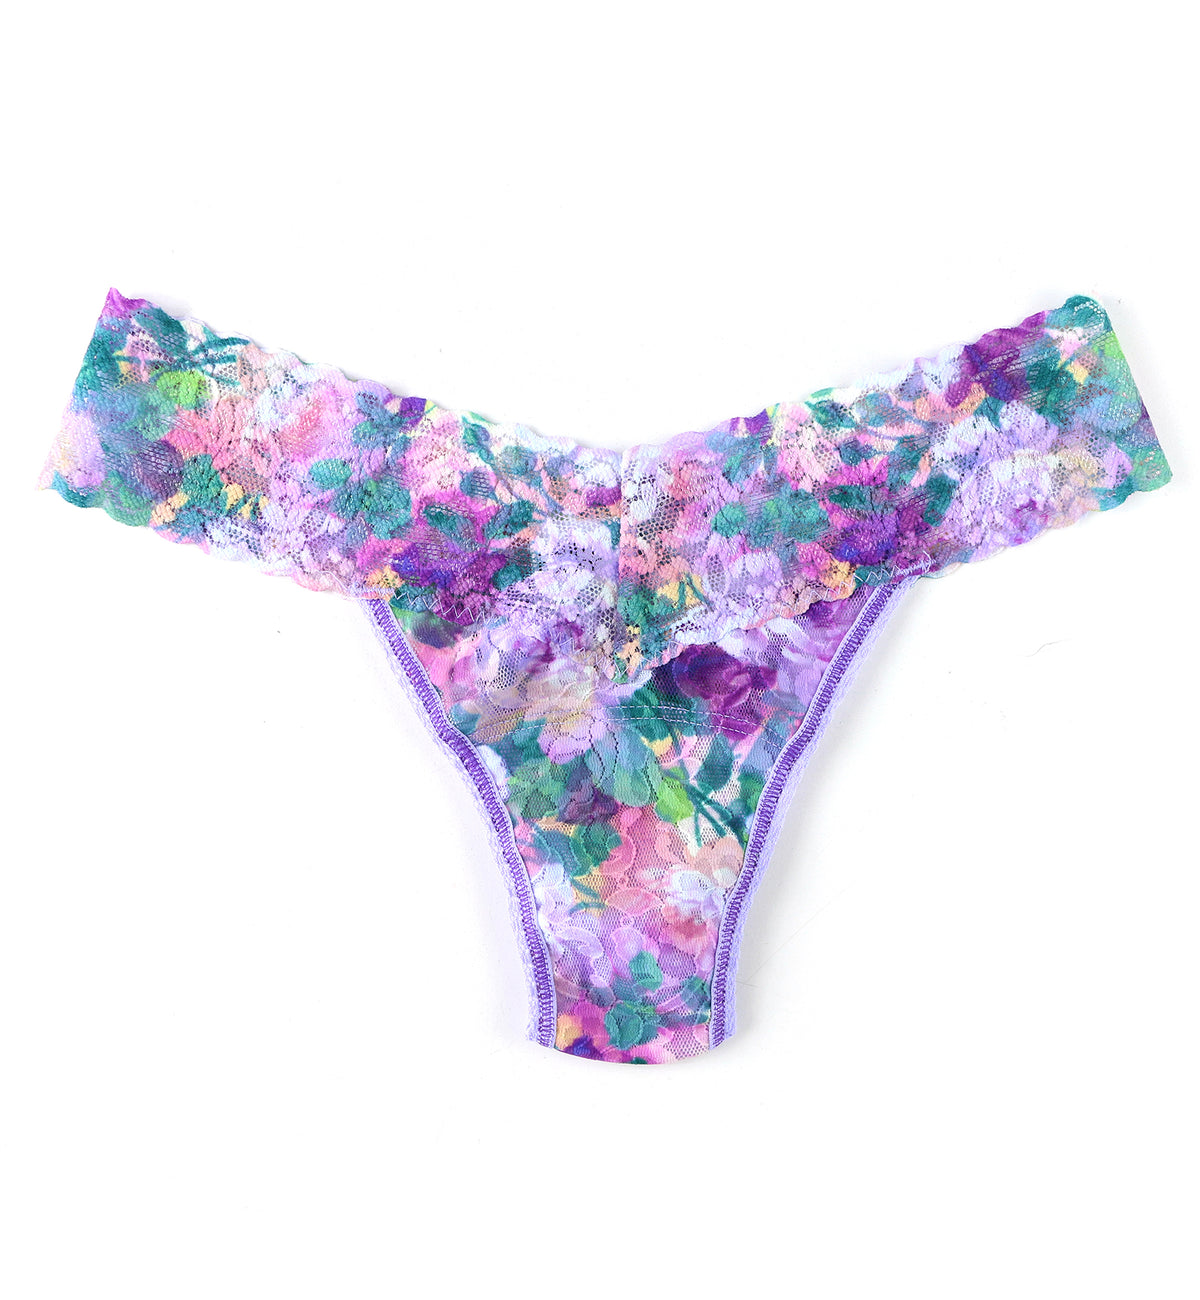 Hanky Panky Signature Lace Printed Low Rise Thong (PR4911P),Bathe in Petals - Bathe in Petals,One Size